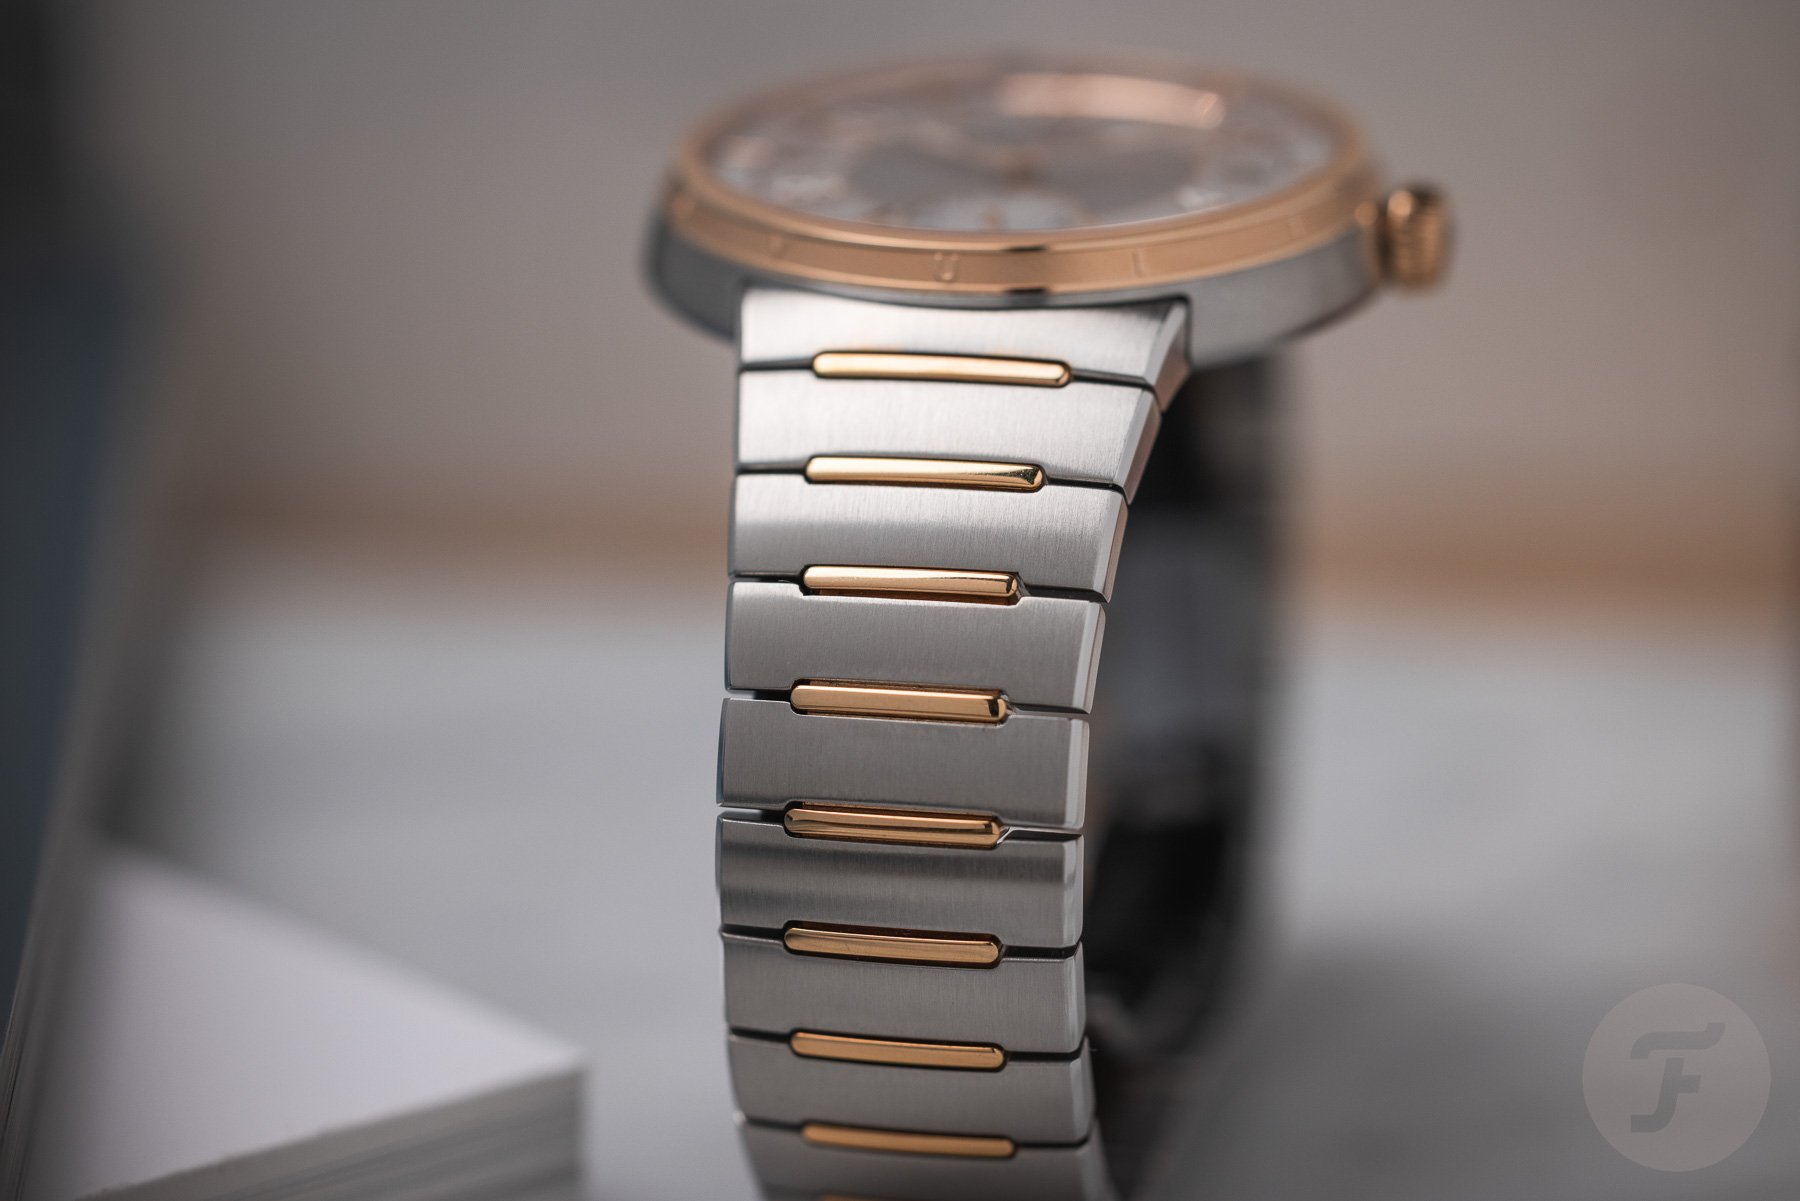 Tambour, Automatic, 40mm, Rose Gold - Watches - Traditional